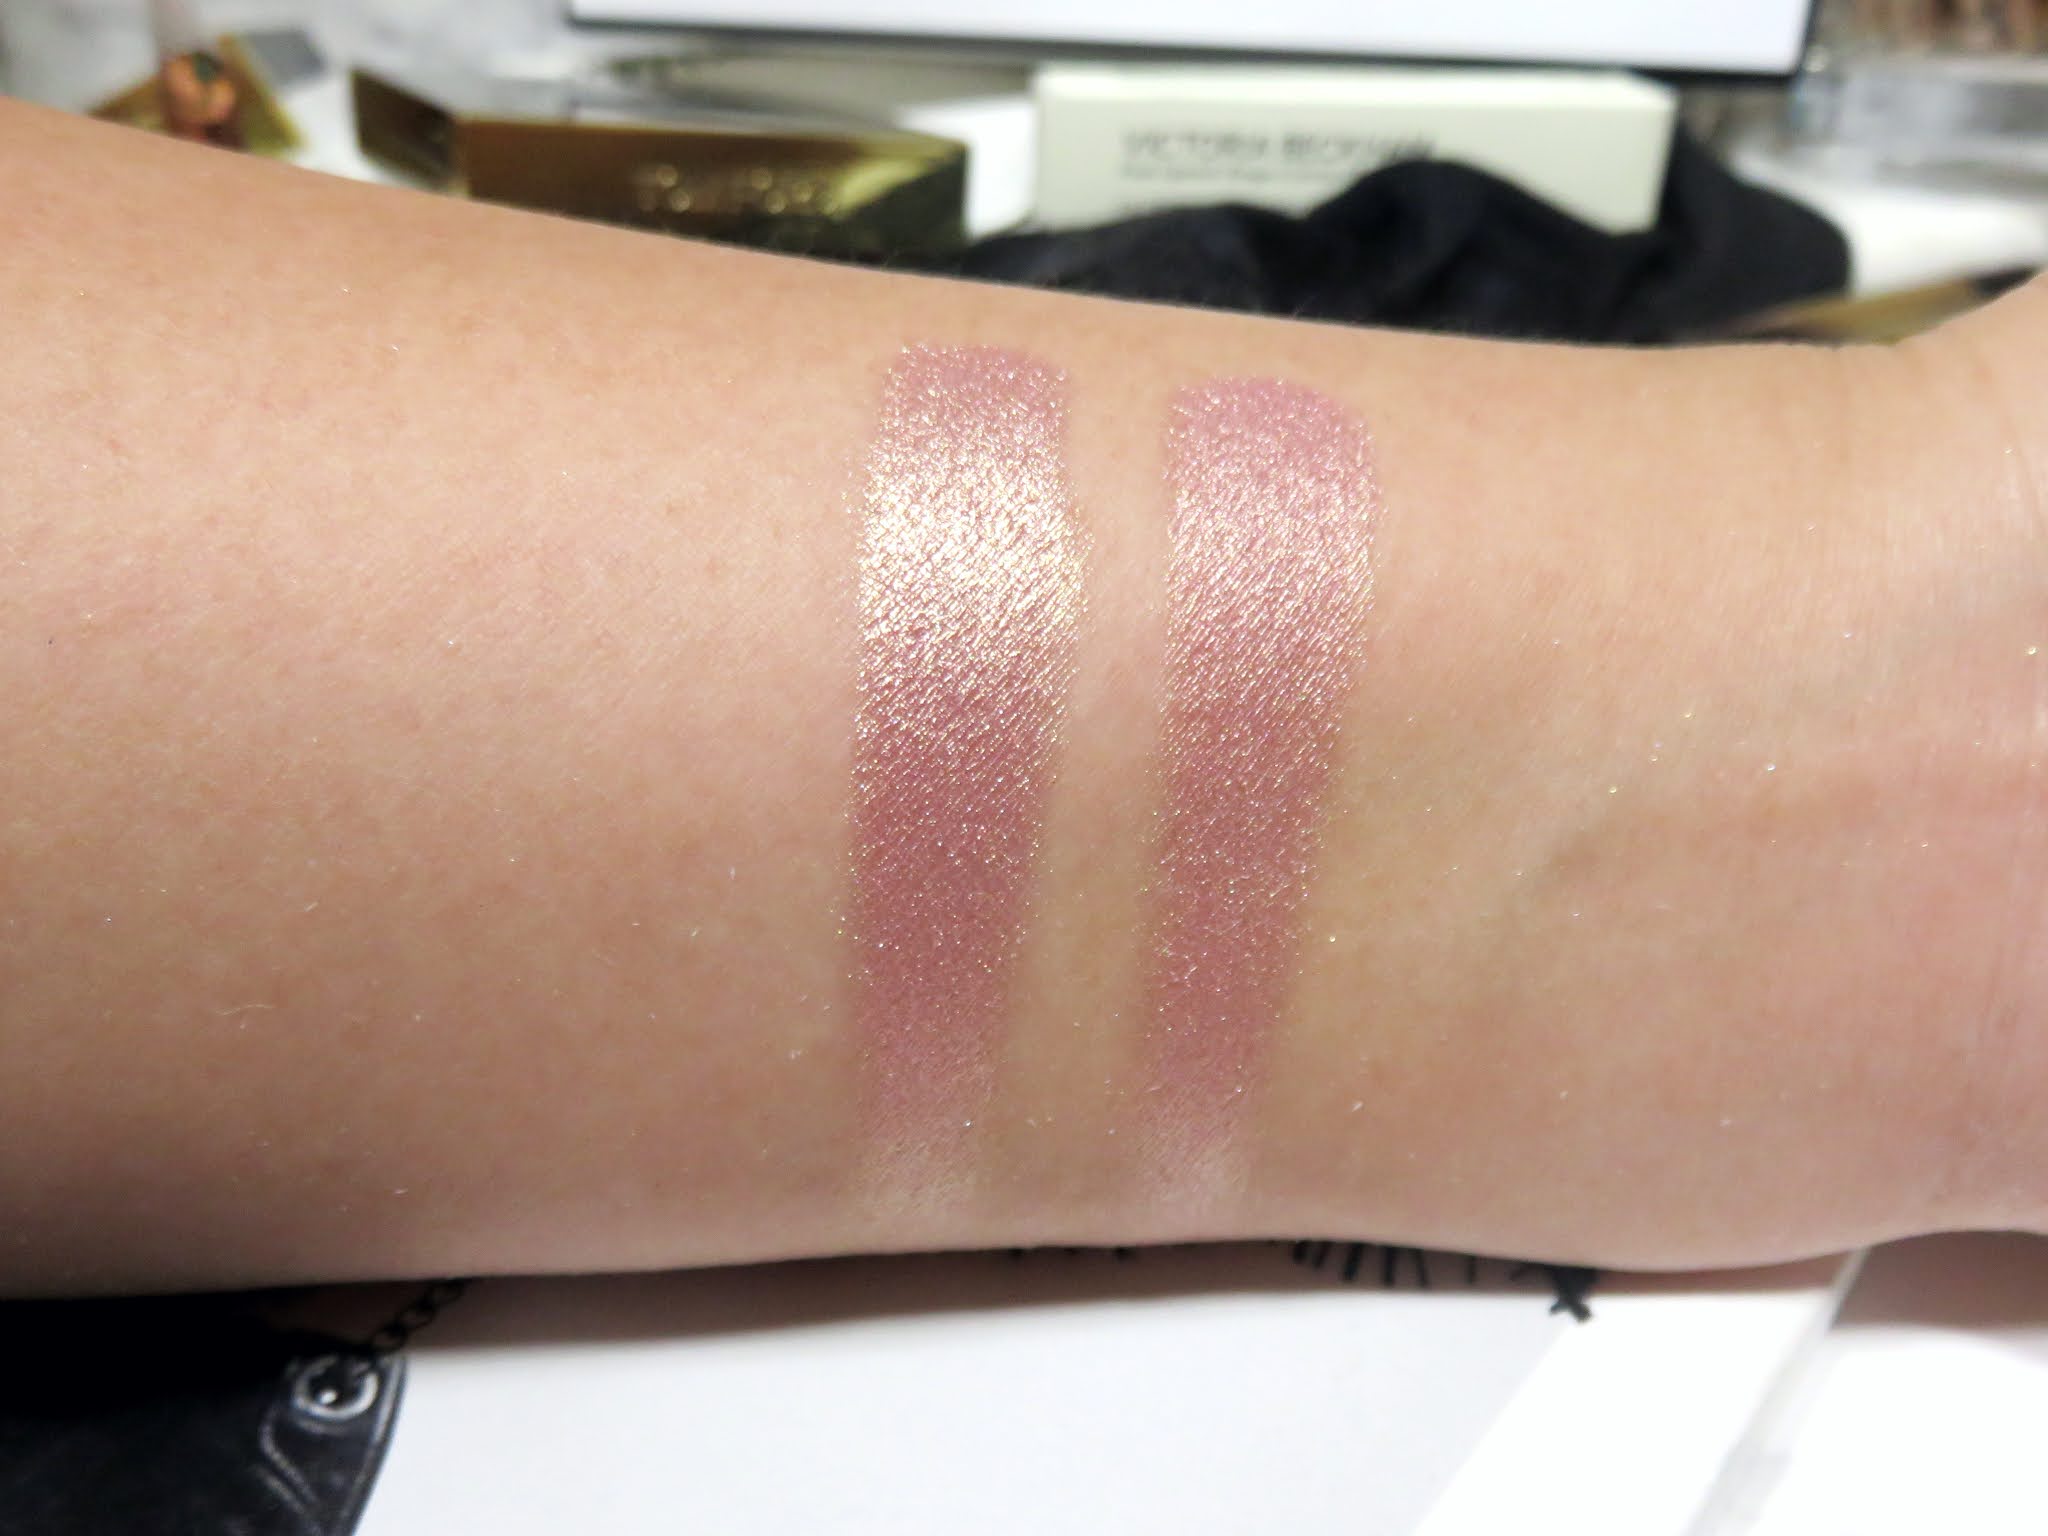 Tom Ford Soleil Neige First Frost Eye Color Quad Review and Swatches